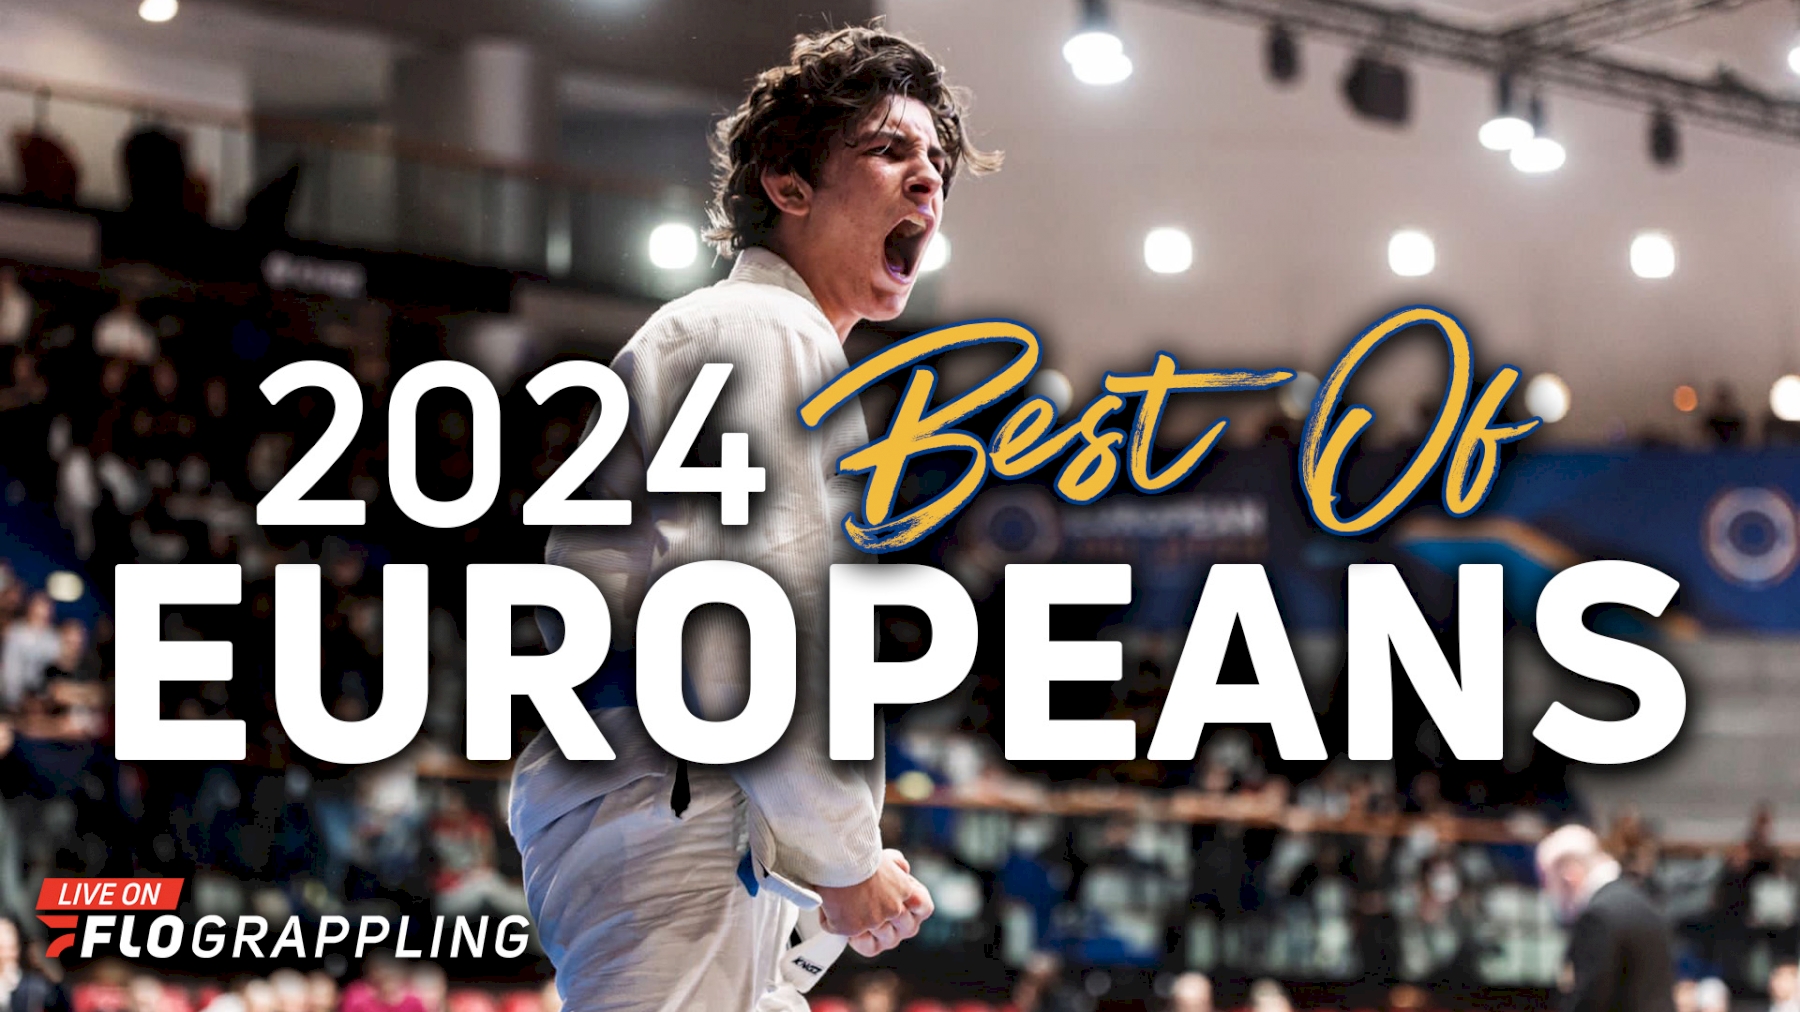 Inside 2024 IBJJF Euros The Best Action, All Access, and More